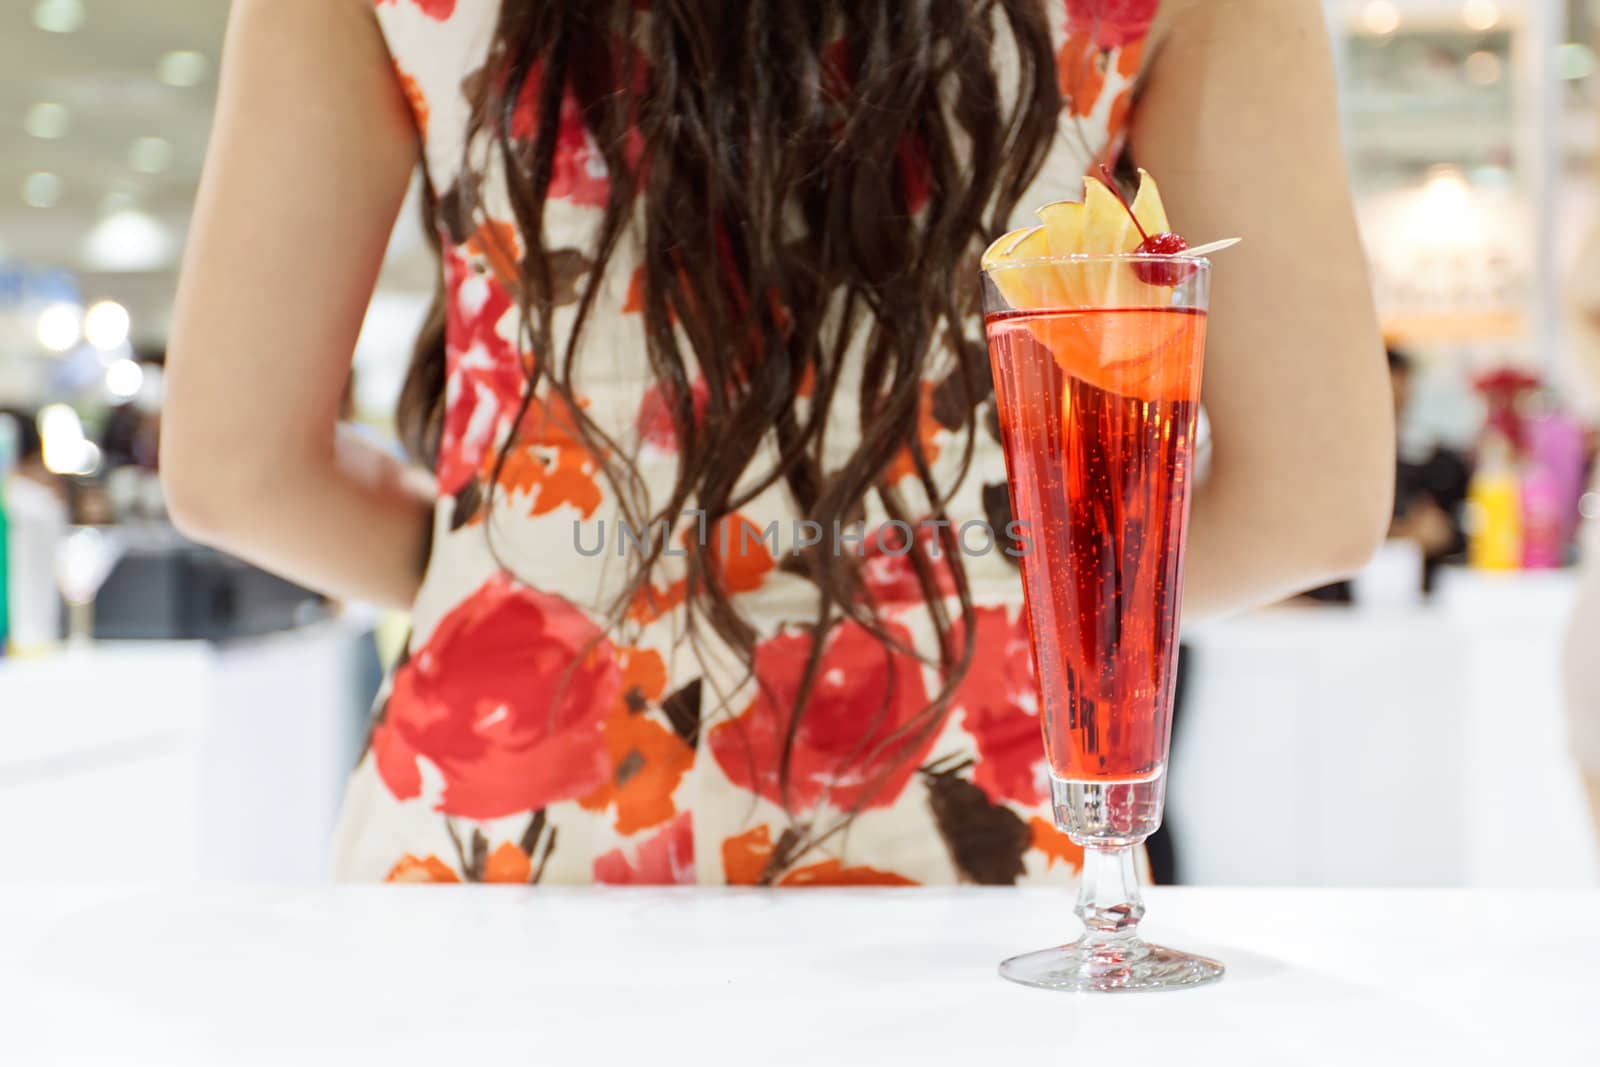 A tall glass of cocktail "Eliza" with a girl's back and hair on background